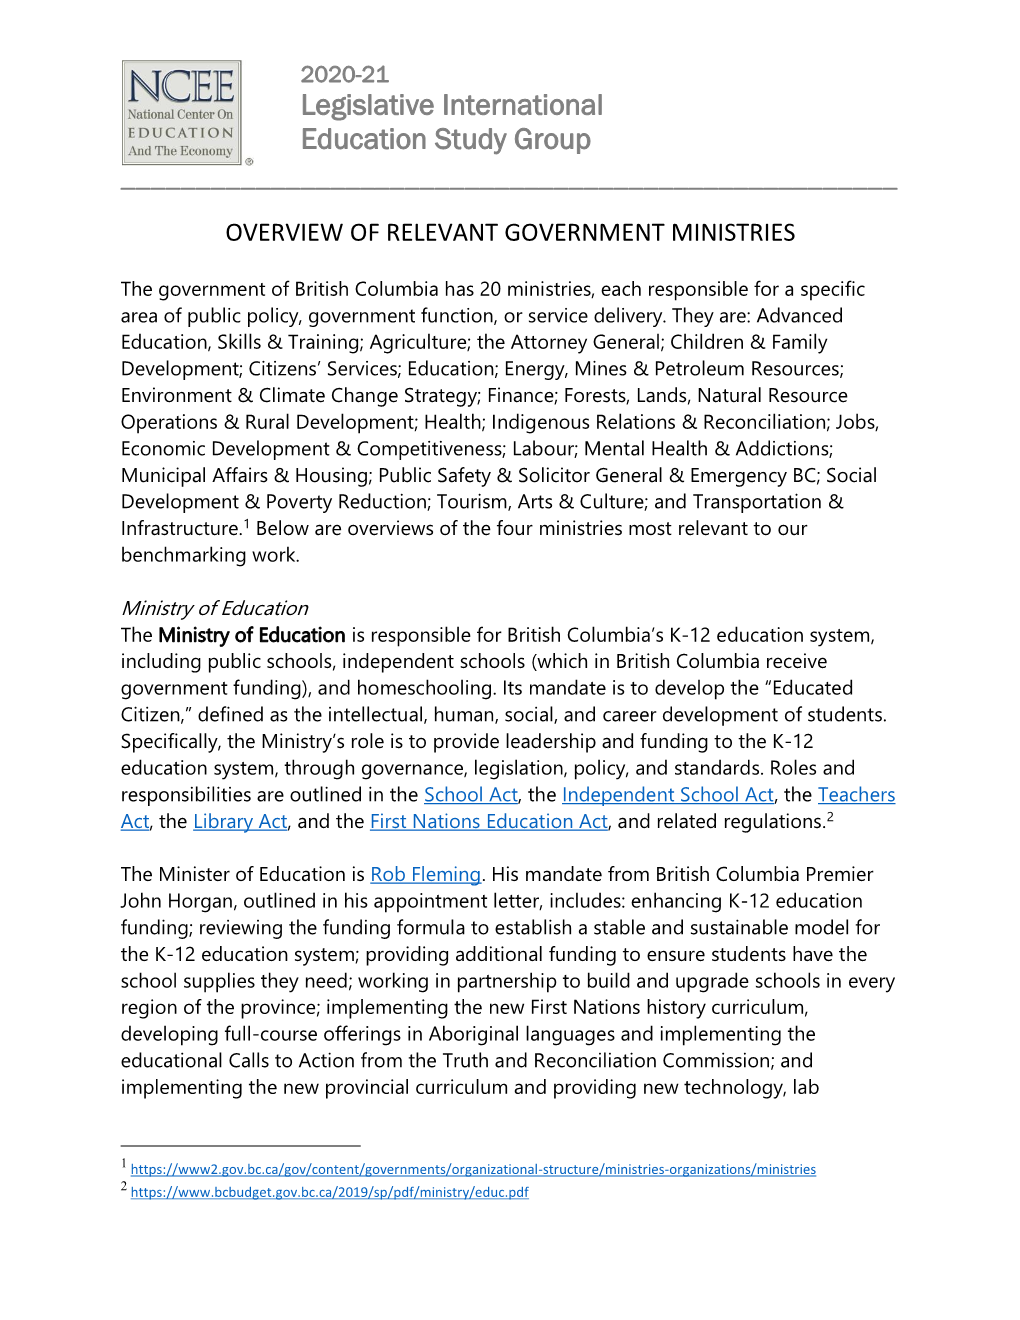 Overview of Relevant BC Government Ministries